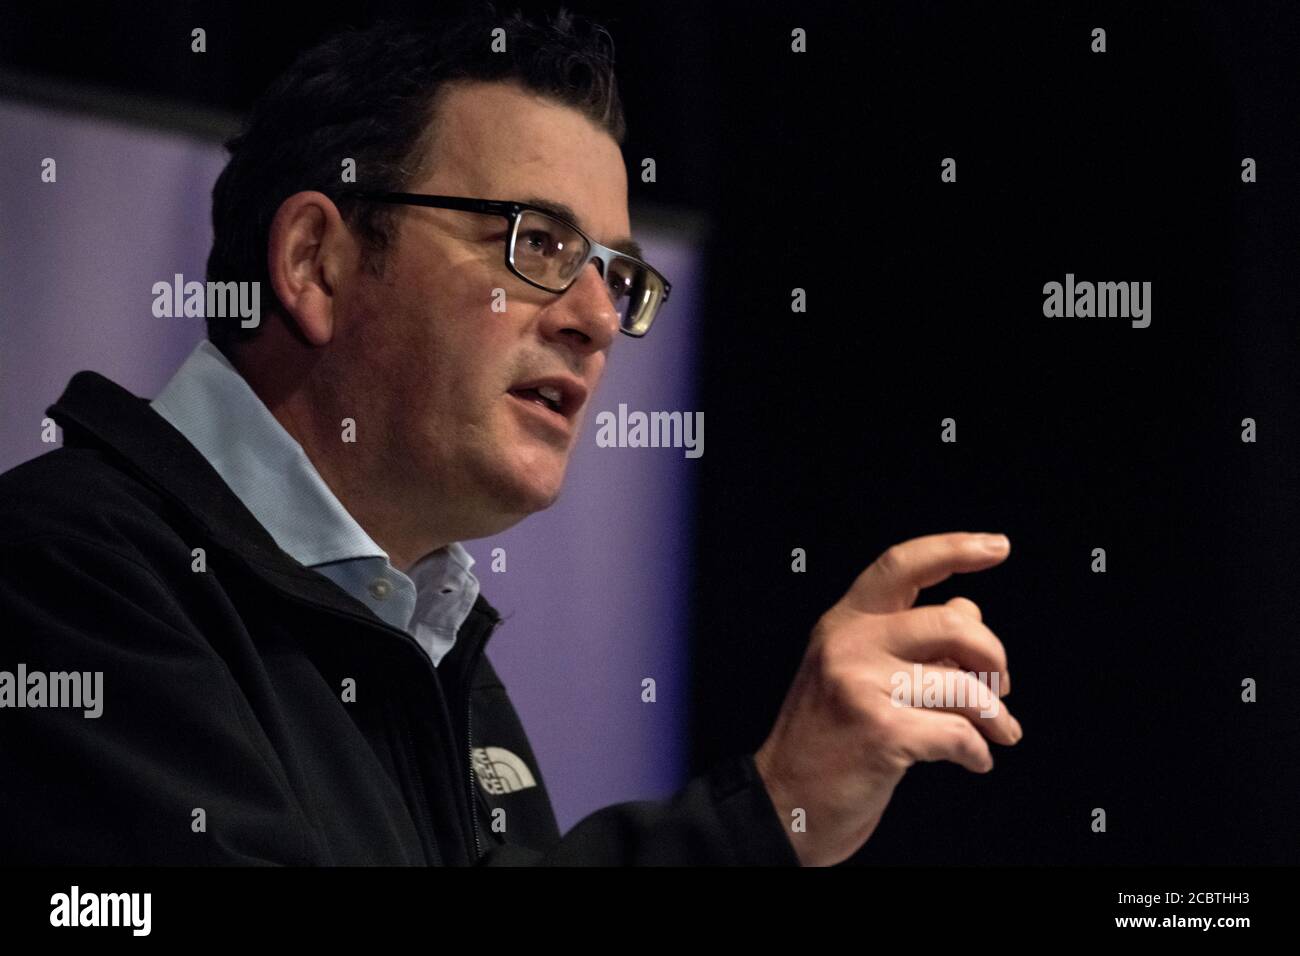 Melbourne, Australia, 15 August 2020, Victorian State Premier Daniel Andrews conducts the daily press conference where he updates media and the people of the state of Victoria on the efforts to contain the spread of the corona virus in Australia’s second most populous state. Credit: Michael Currie/Alamy Live News Stock Photo